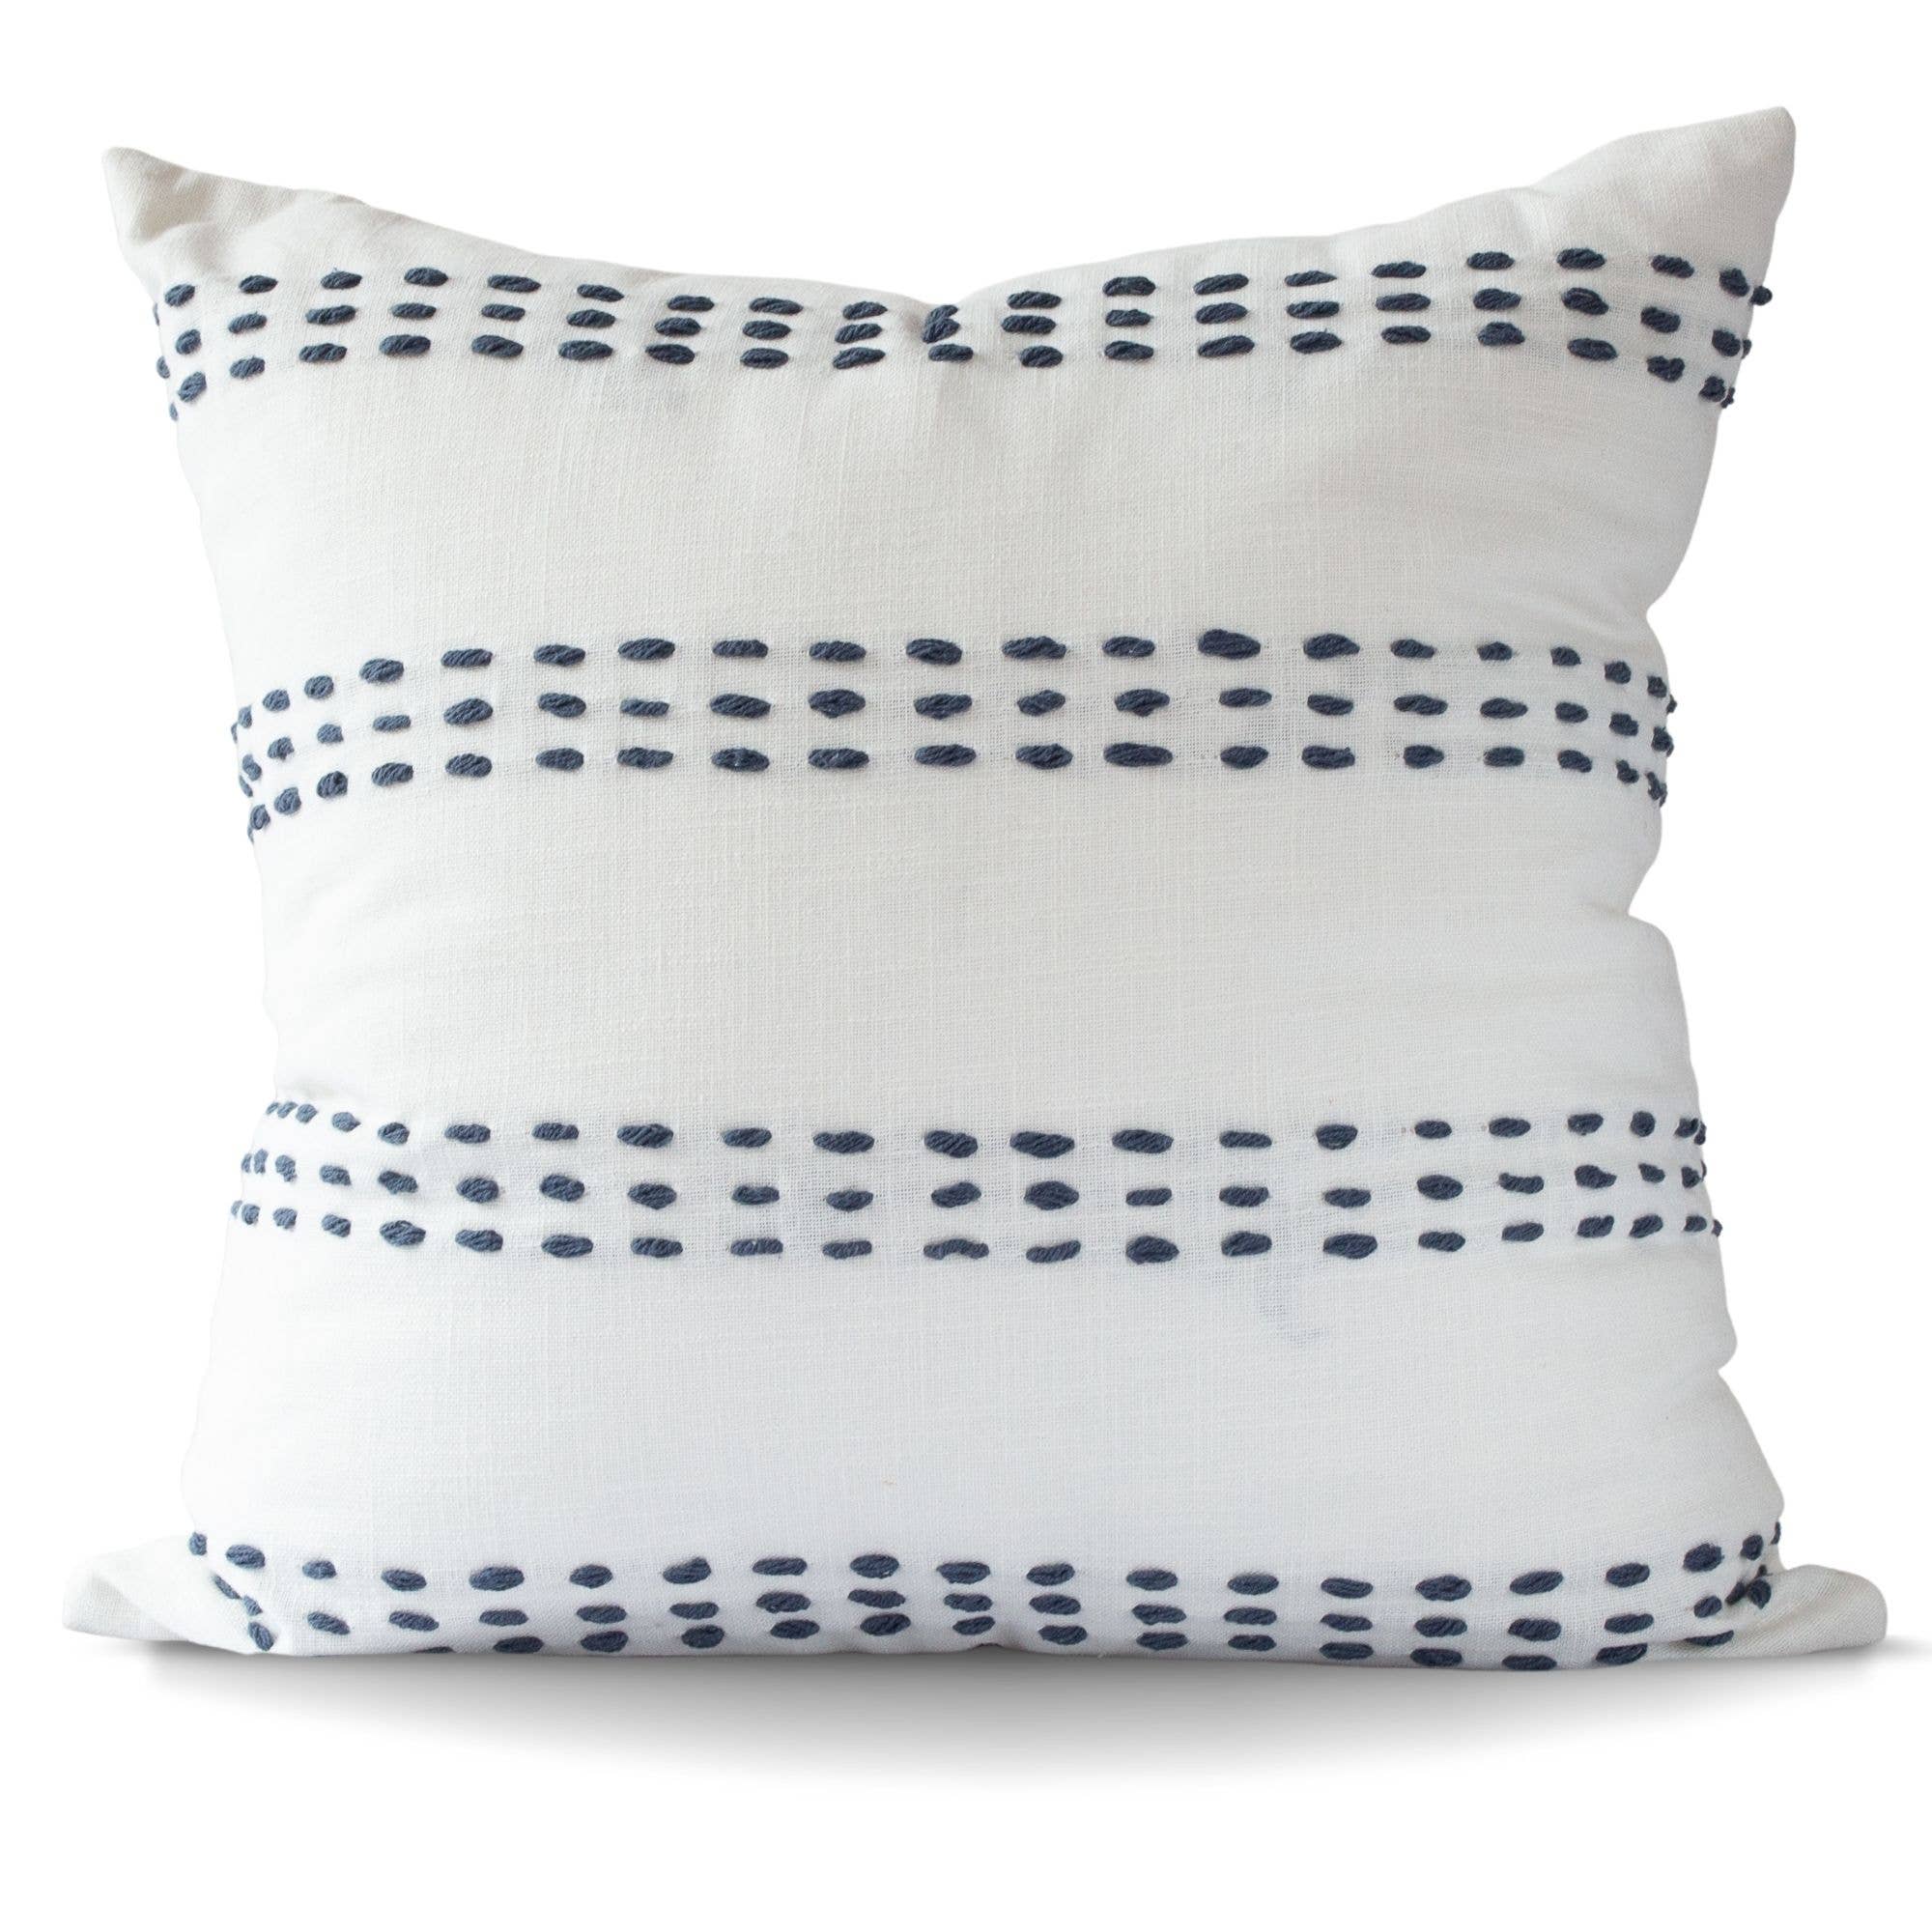 Emani Hand Stitched Pillow Cover